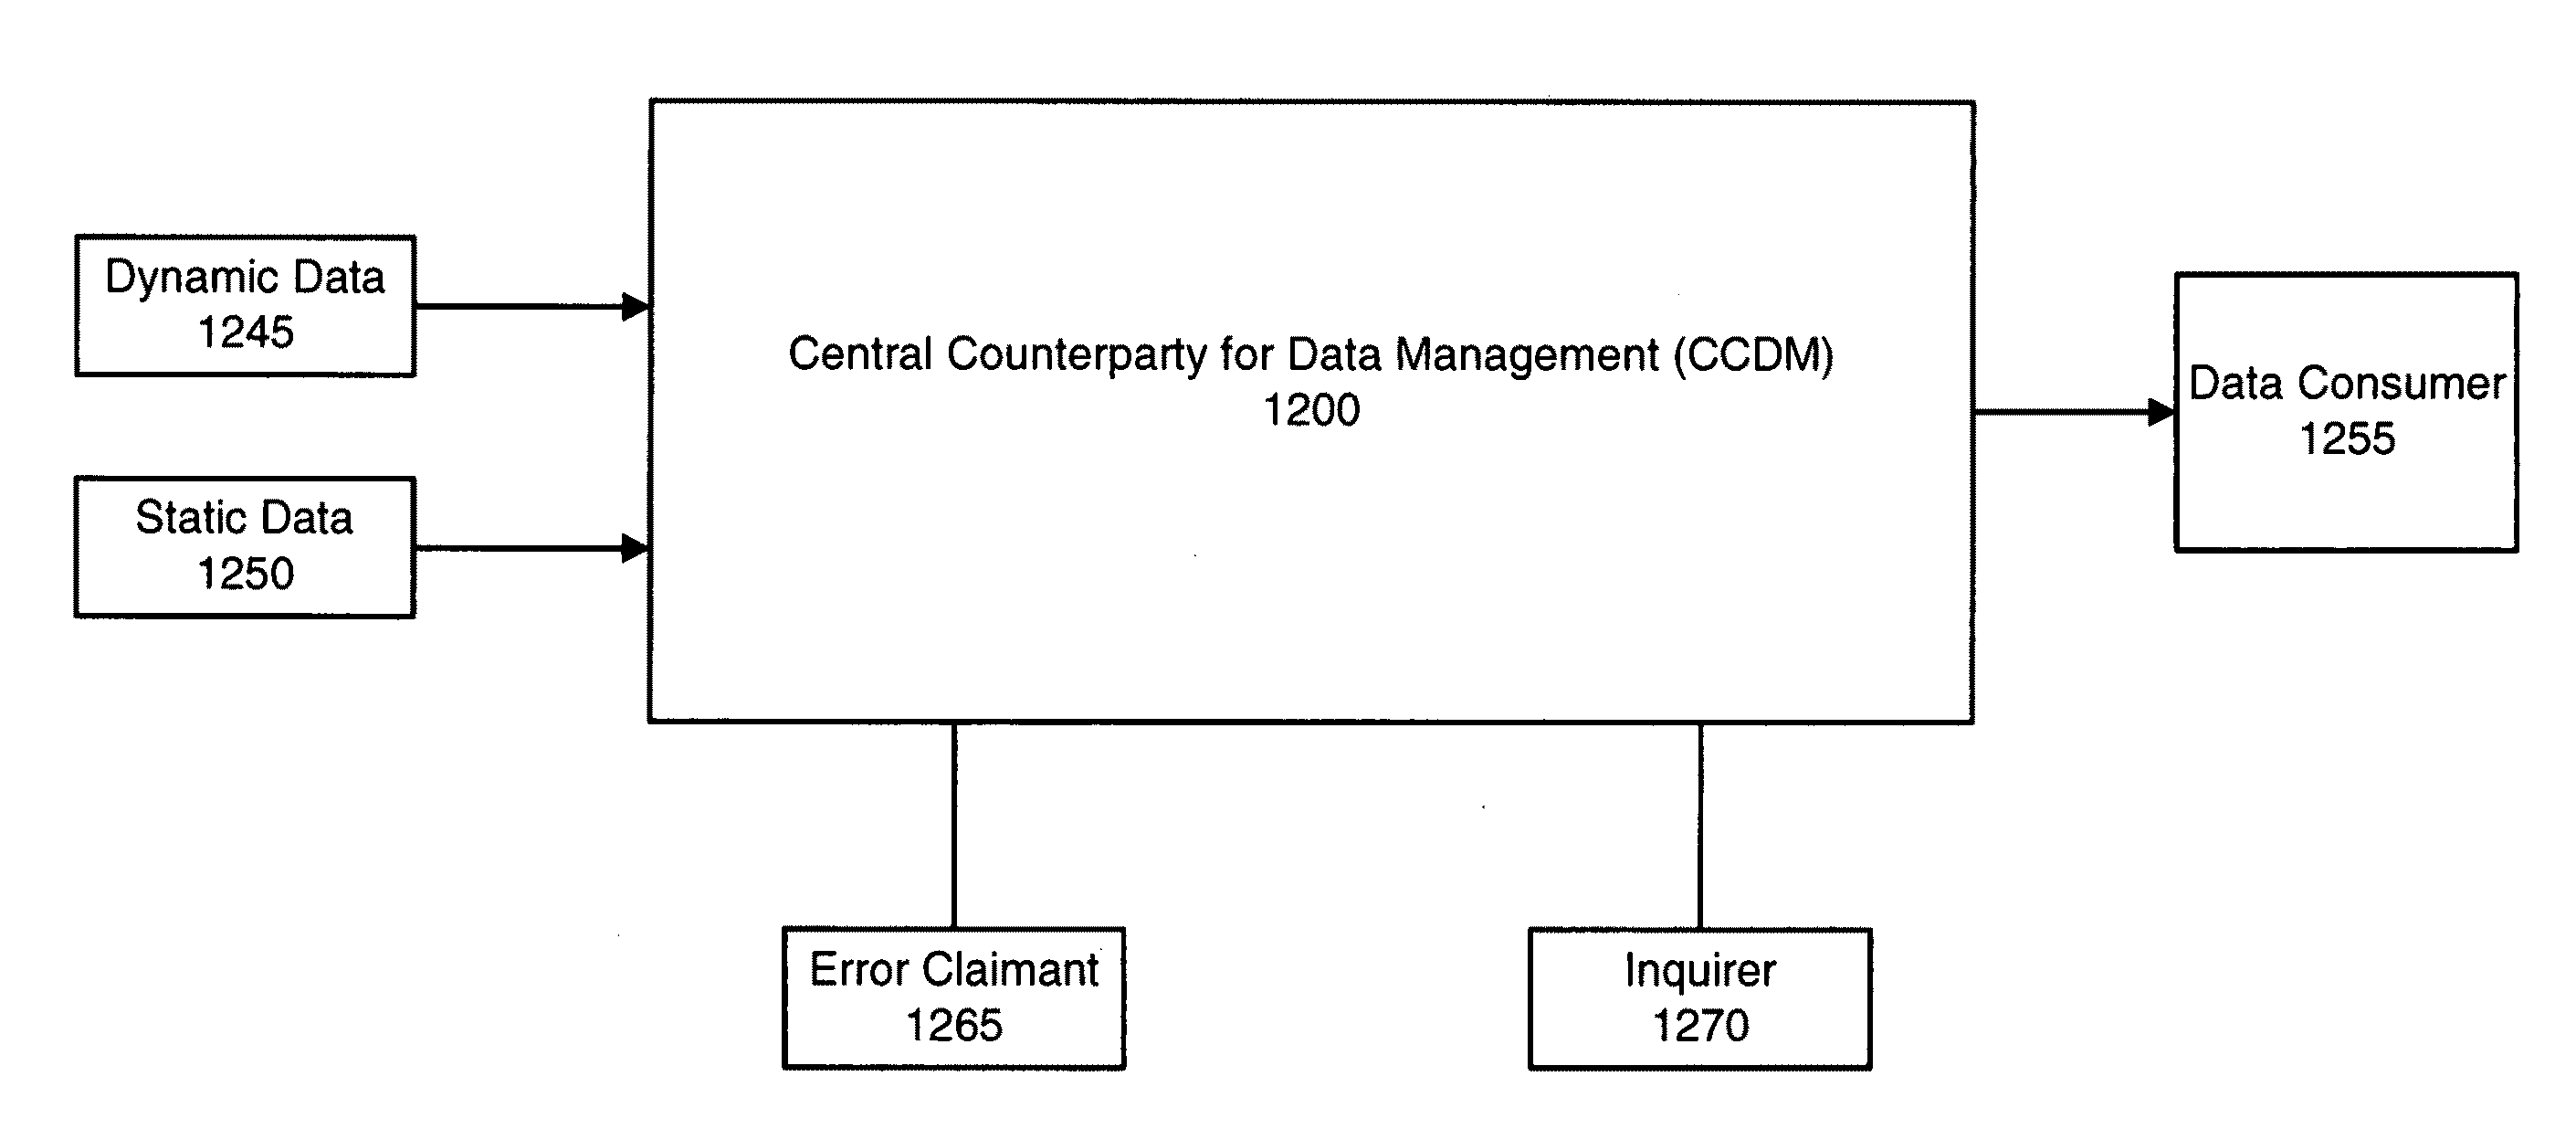 Central counterparty for data management